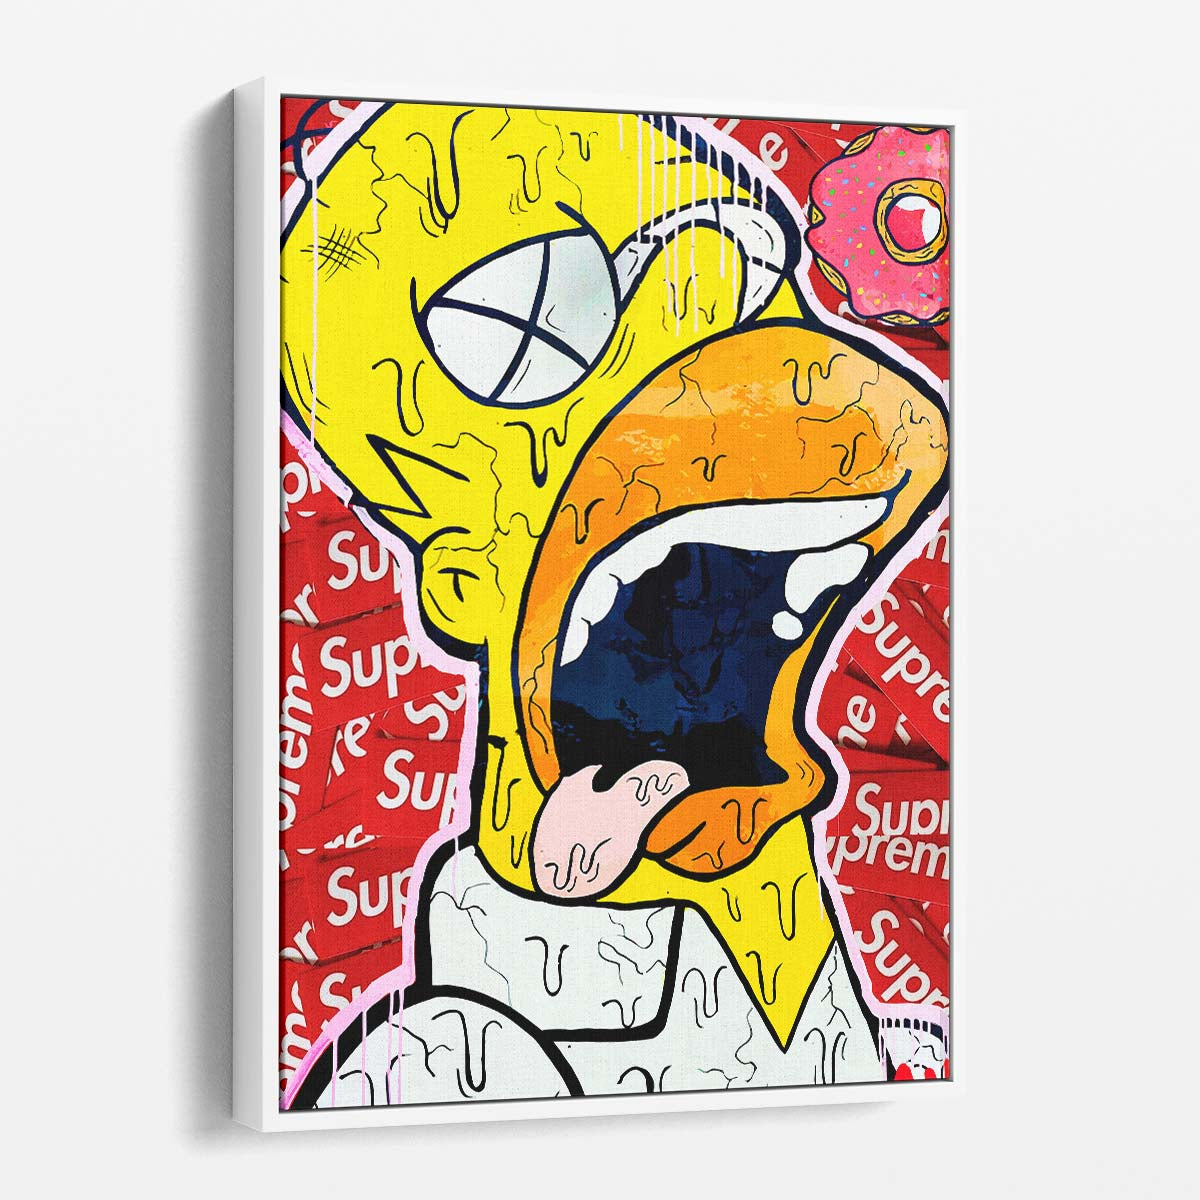 Supreme Lethargic Simpson Wall Art by Luxuriance Designs. Made in USA.